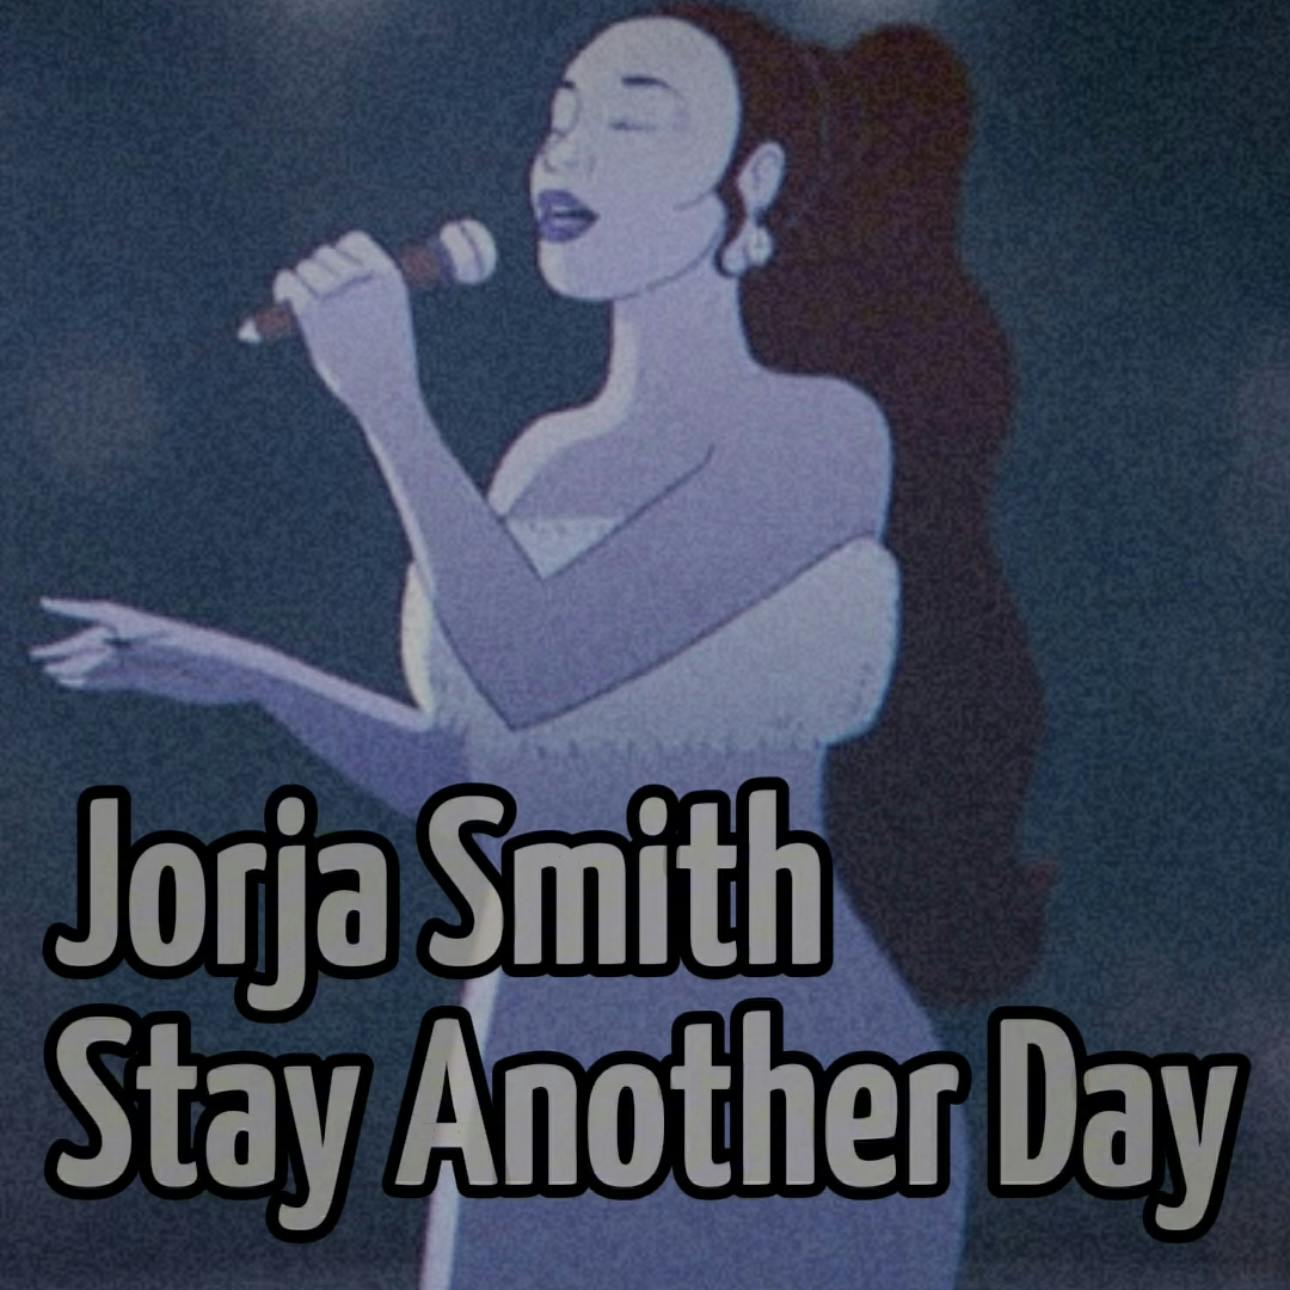 Jorja Smith - Stay Another Day